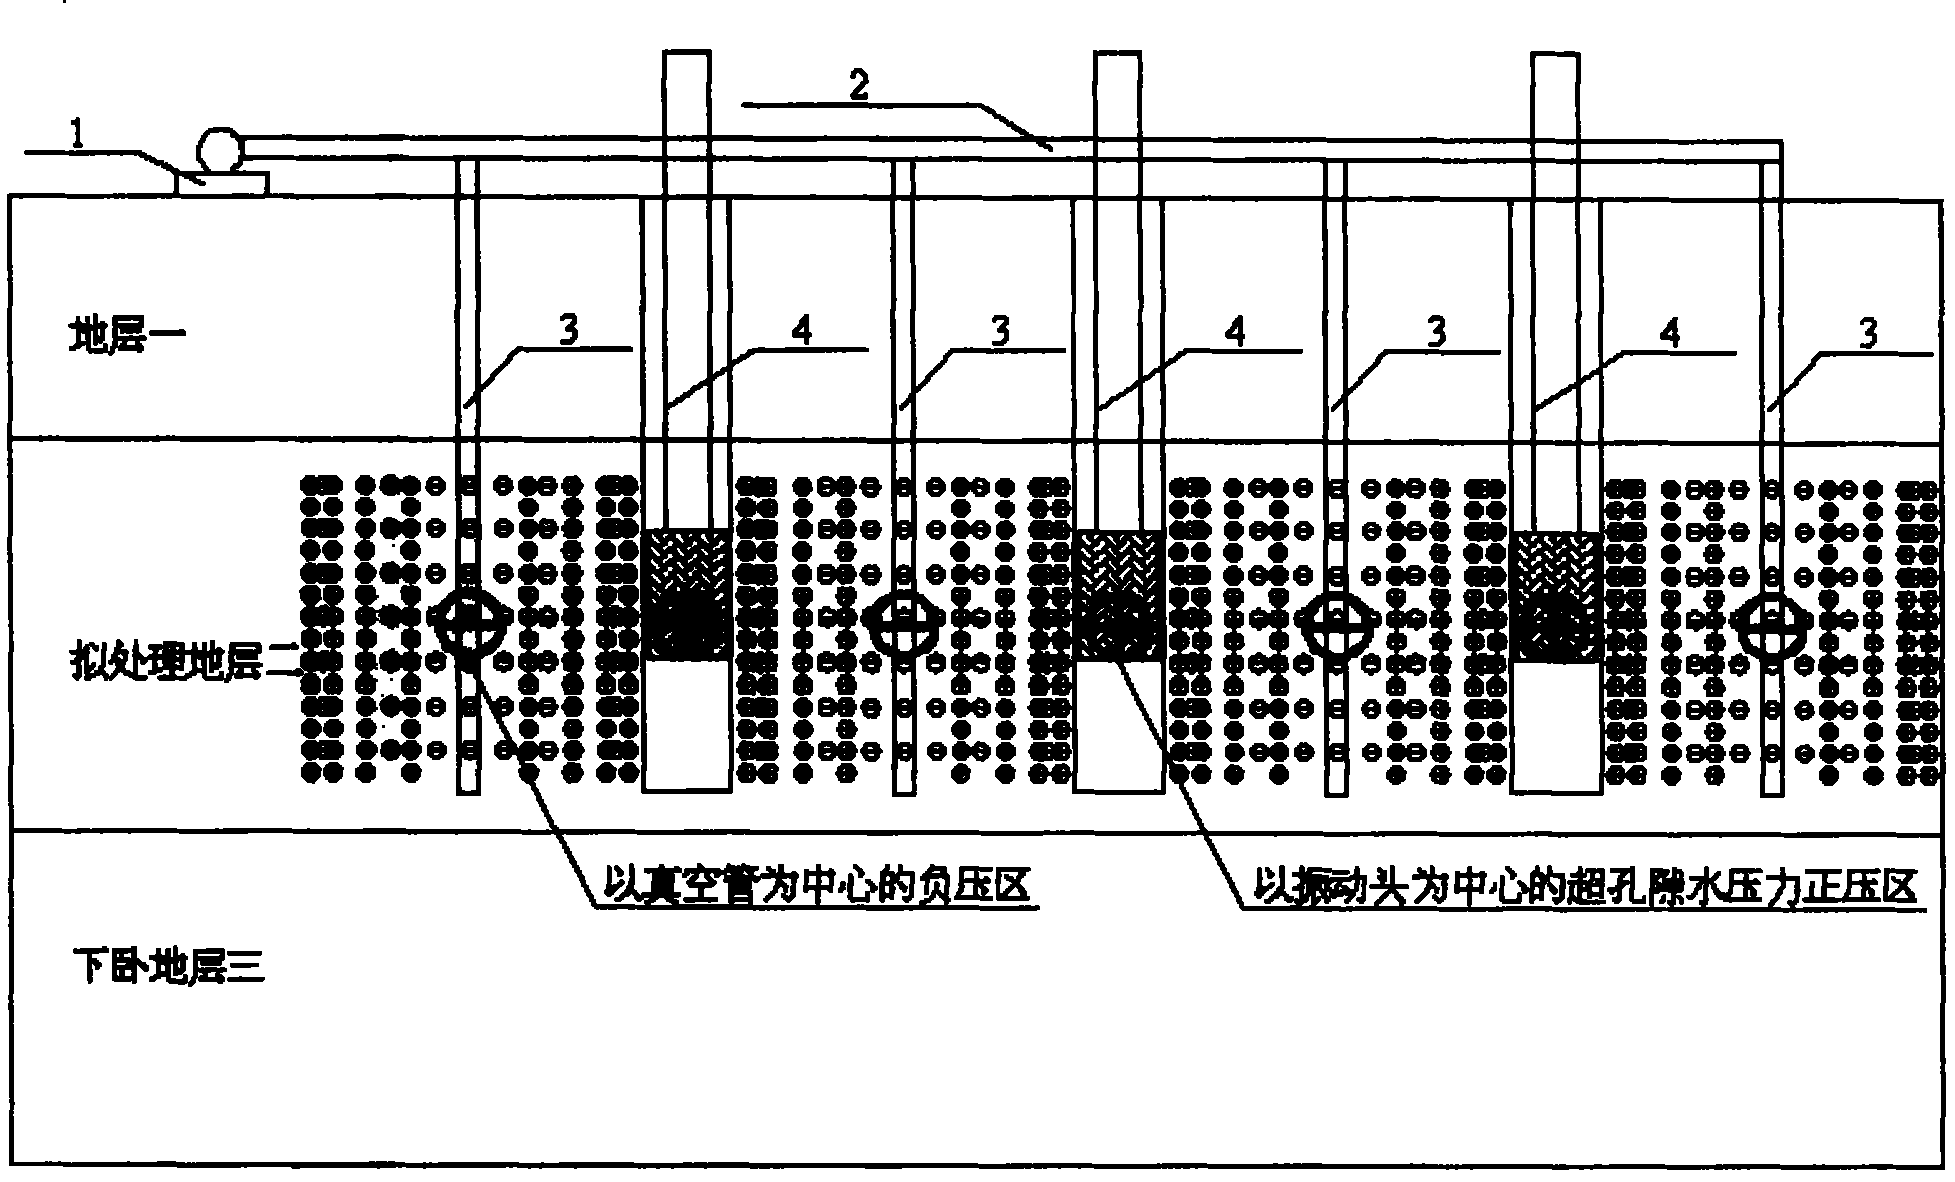 Multi-pressurized rapid consolidation compact soft soil foundation treatment method